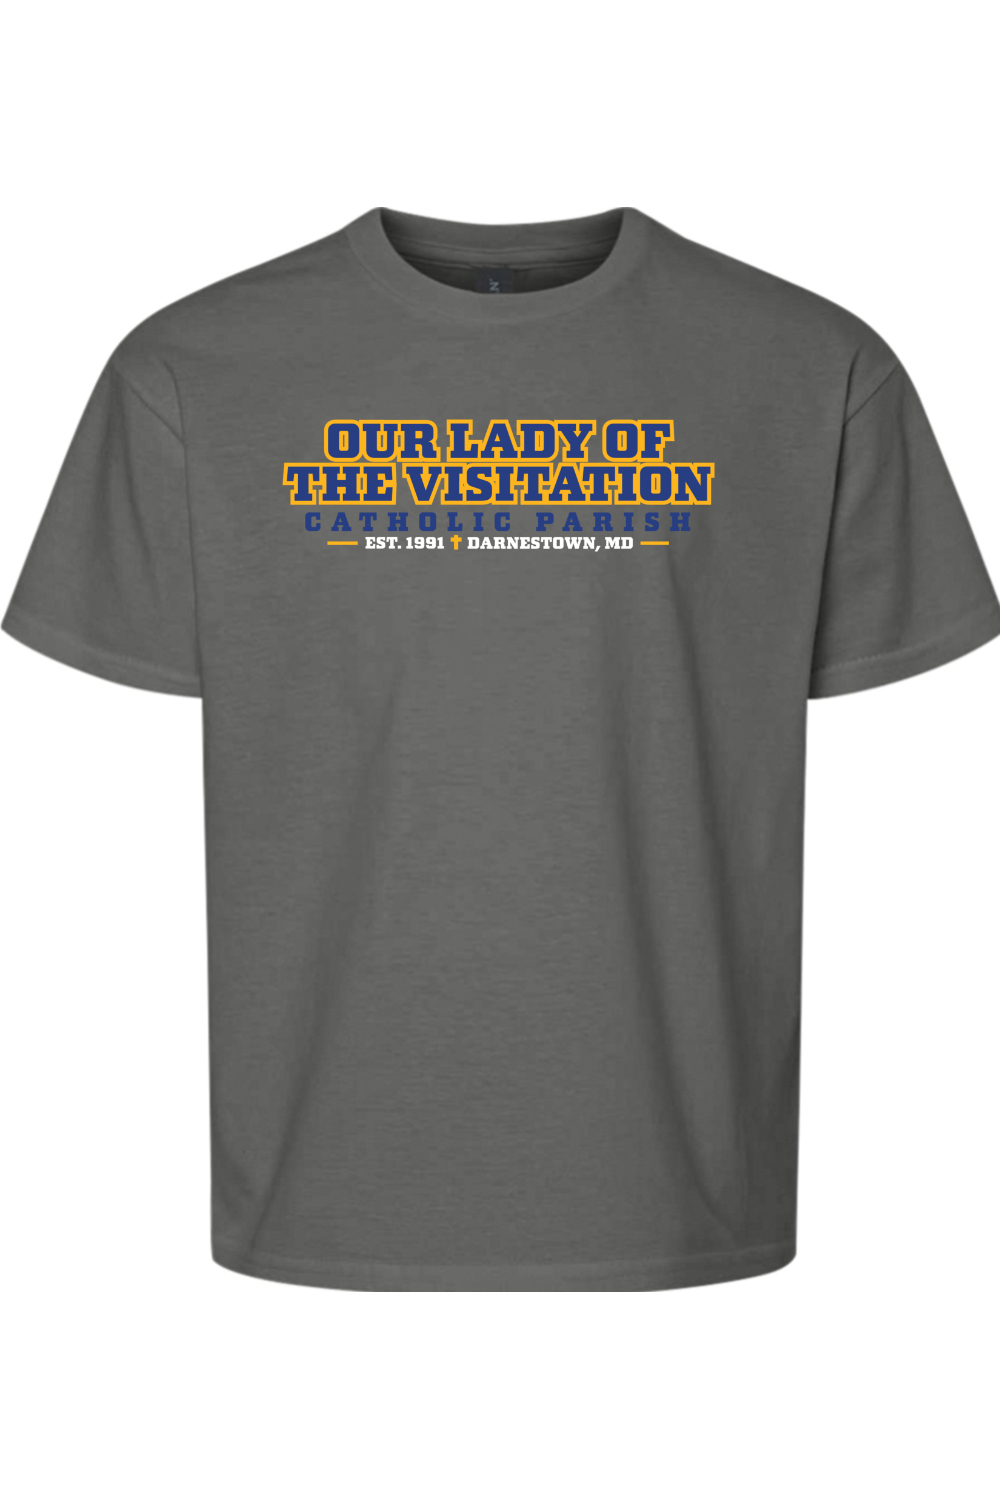 Our Lady of the Visitation Collegiate Youth T-Shirt